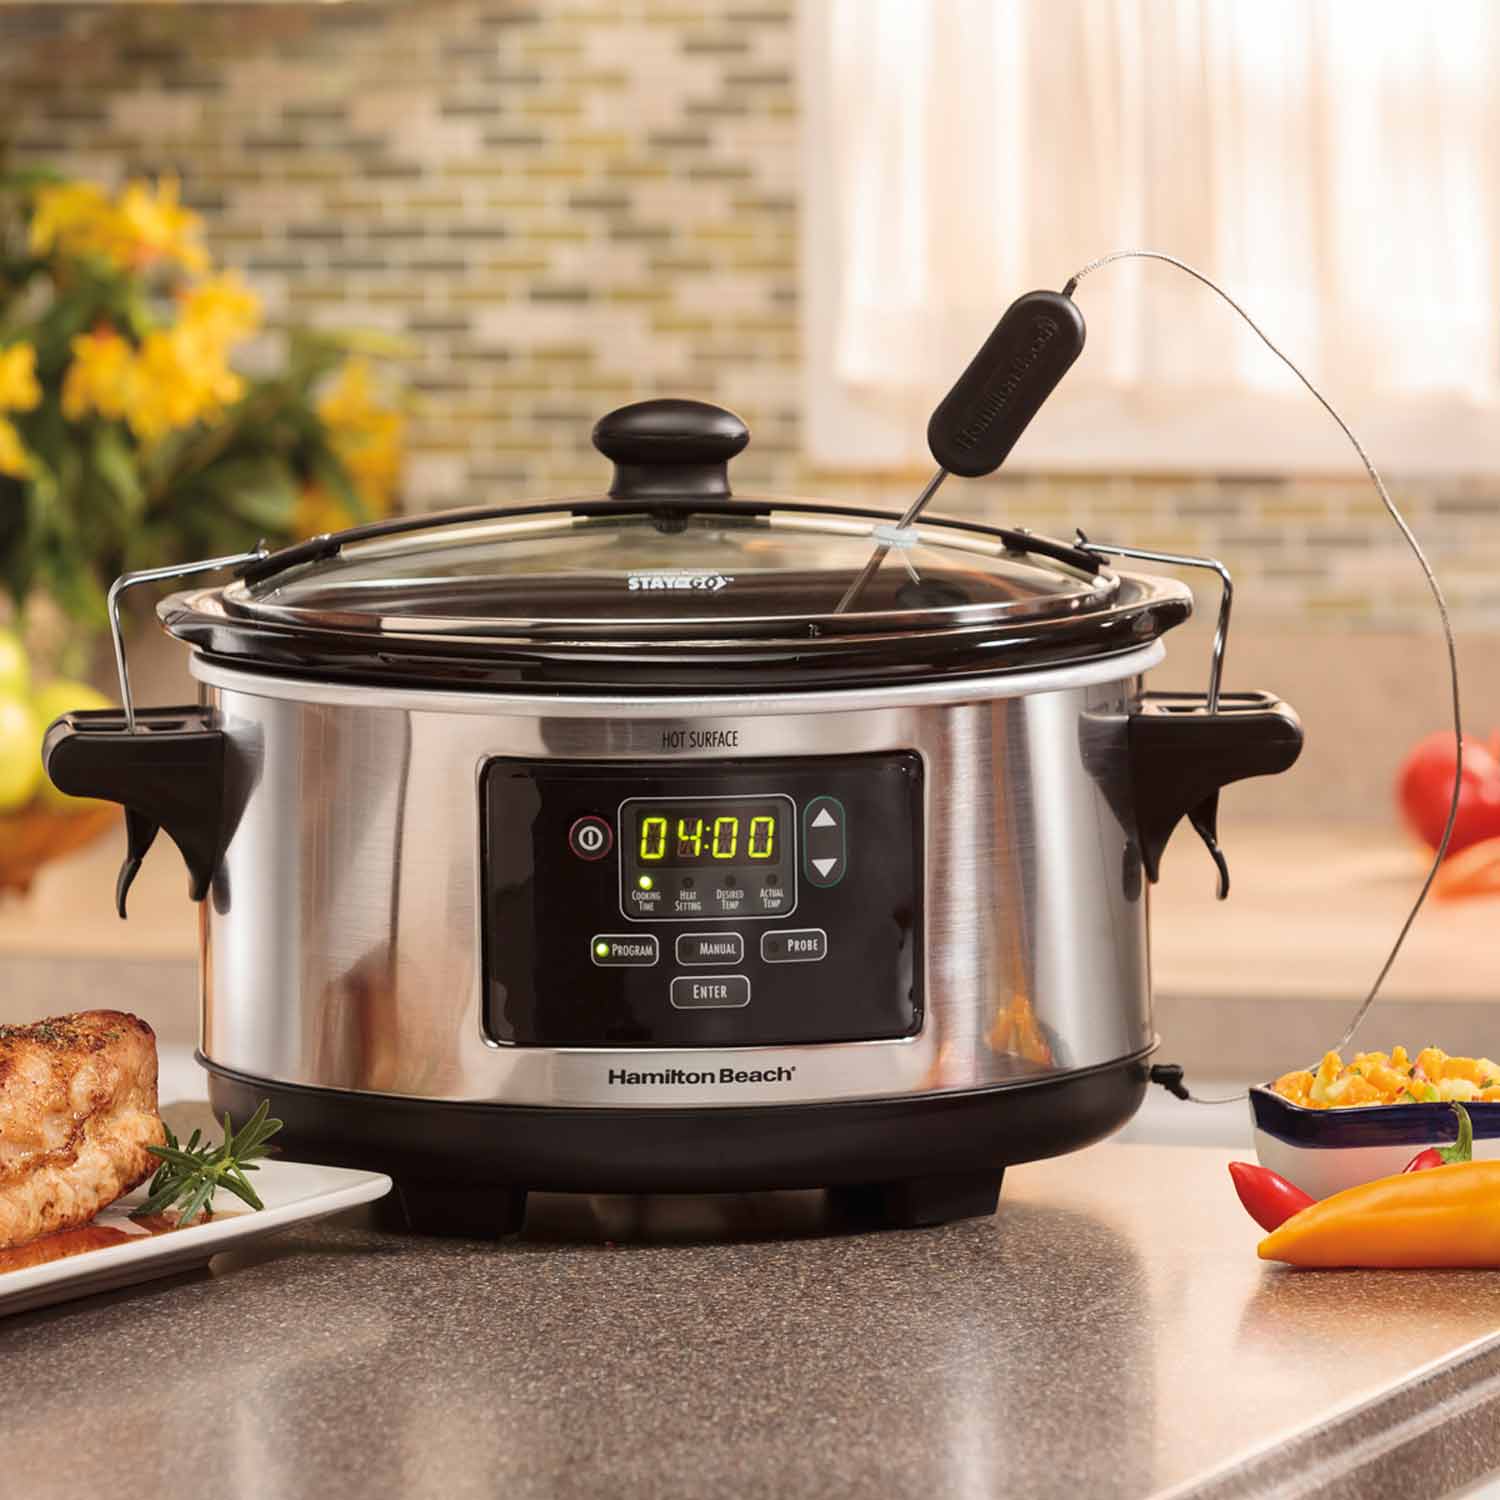 Is it safe to leave slow cookers unattended? Yes!